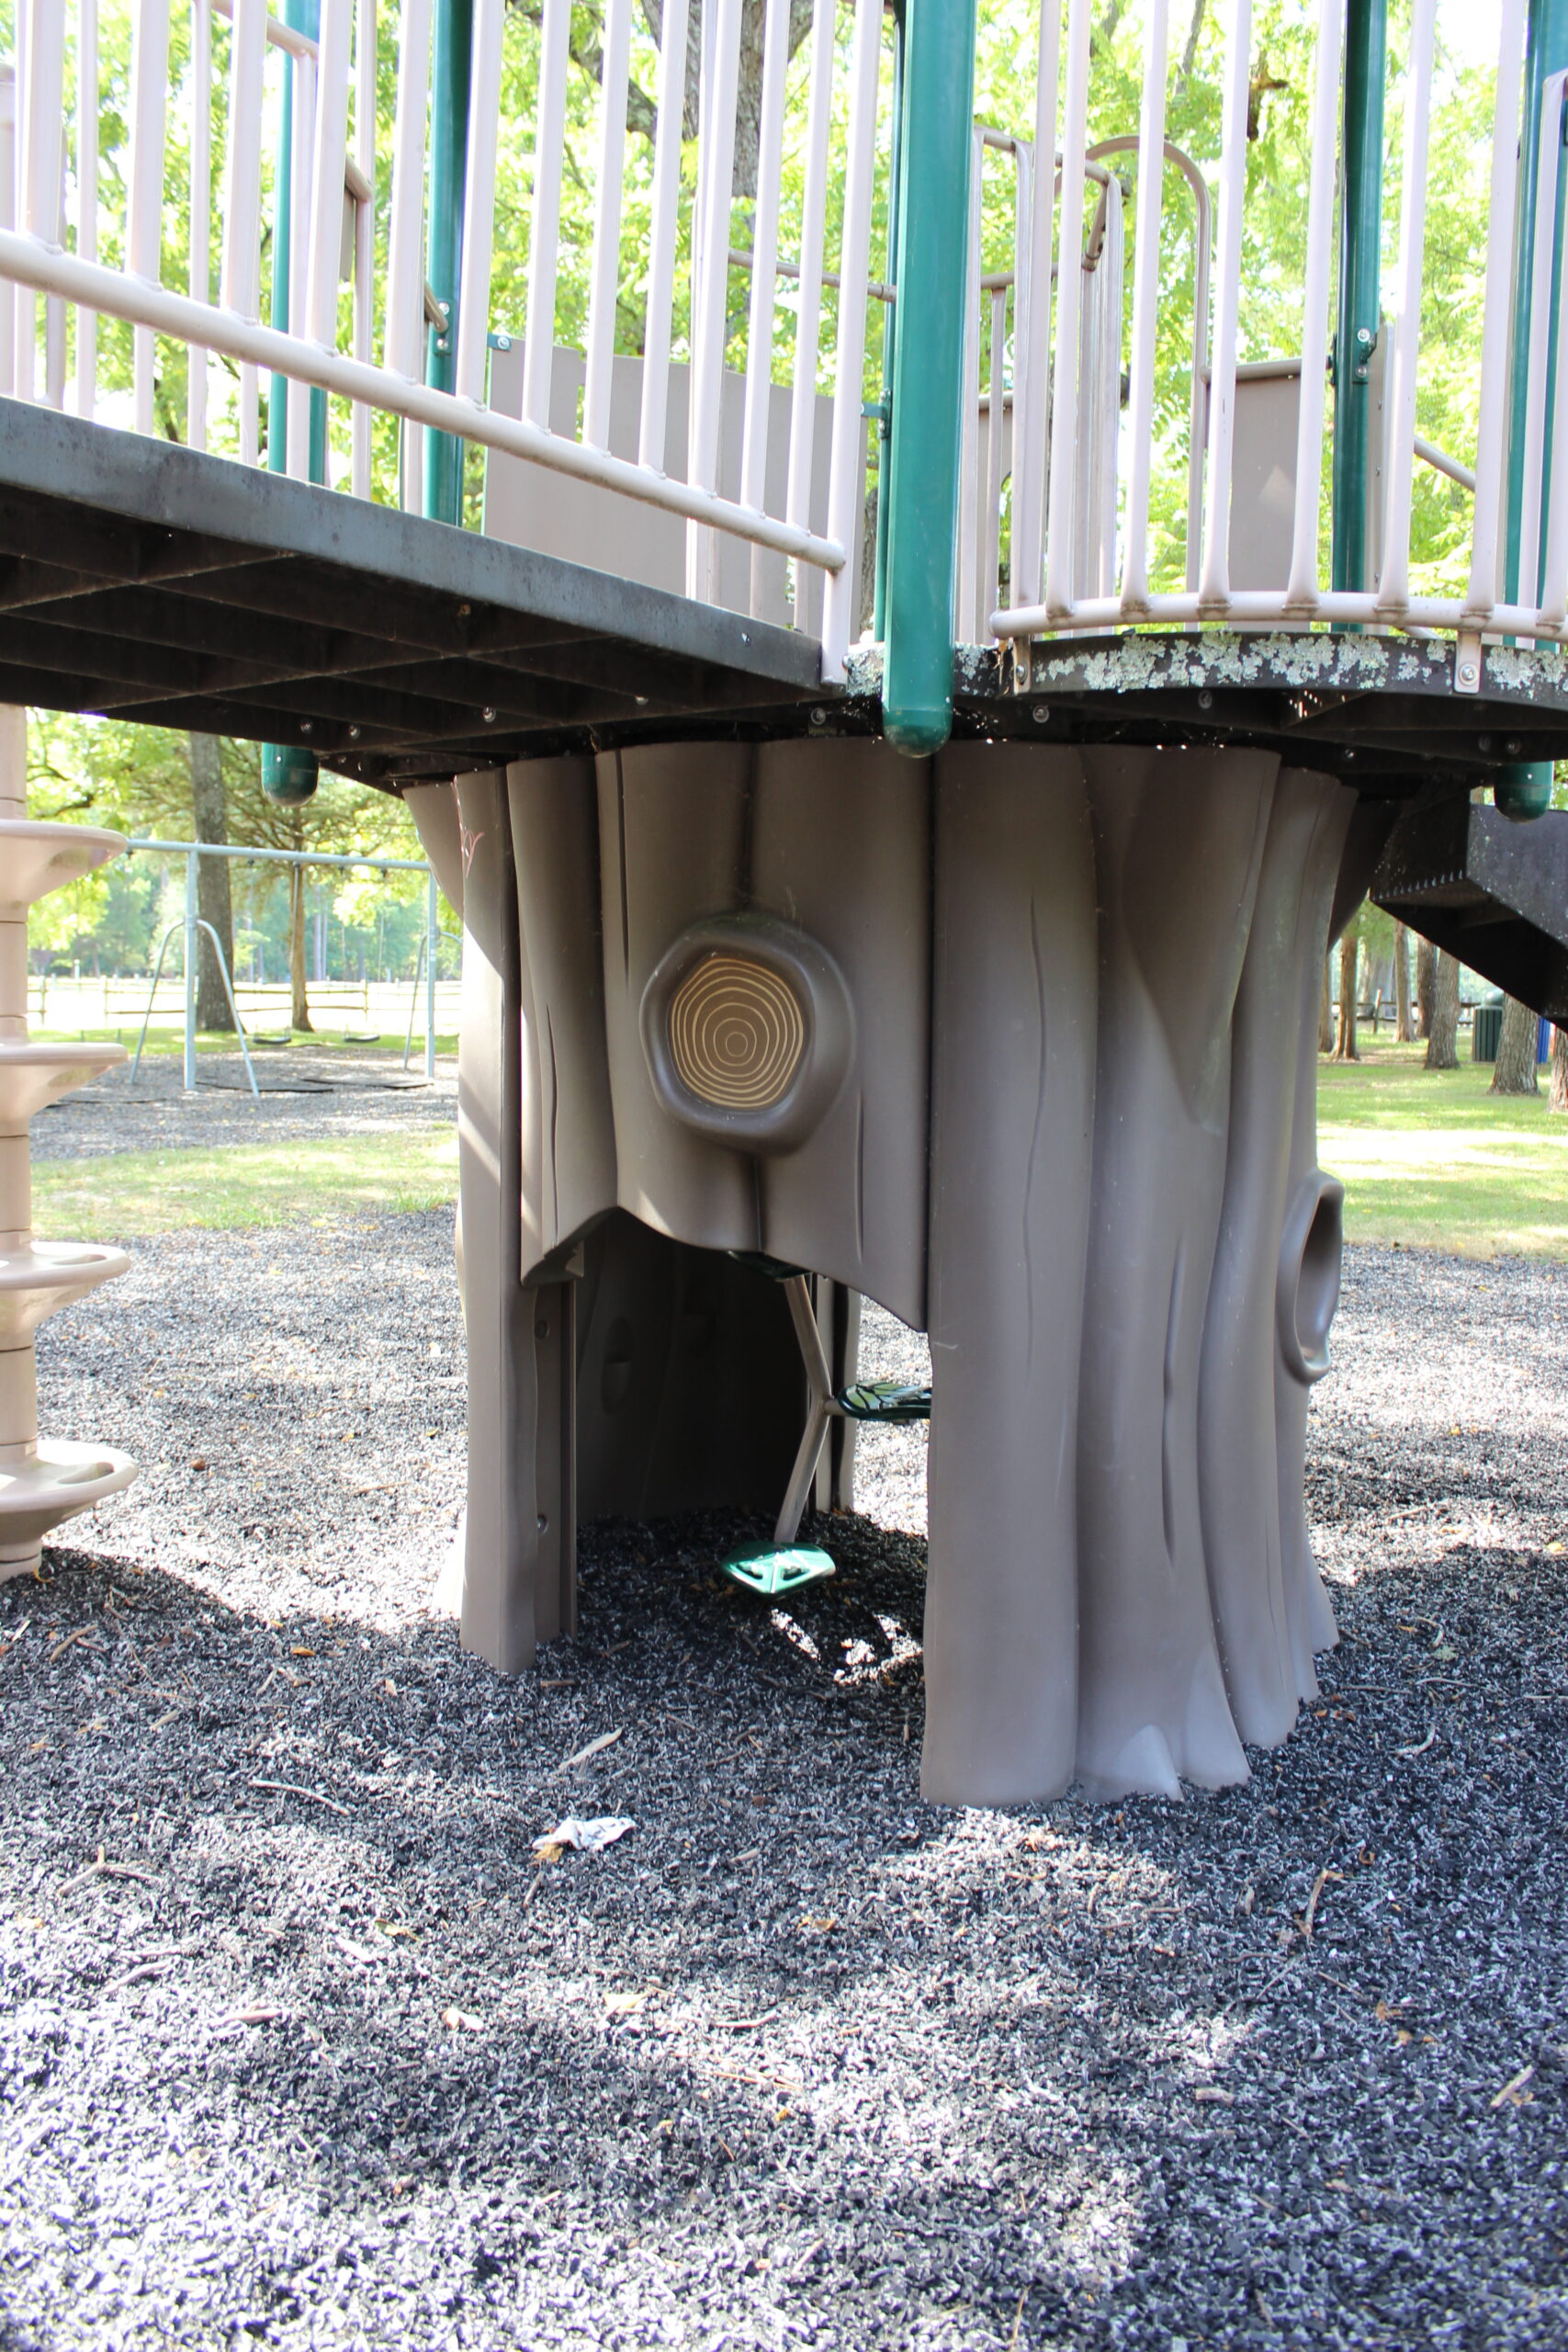 Back Estell Manor Park Playgrounds in Mays Landing NJ - Features - Underneath treehouse SHADY